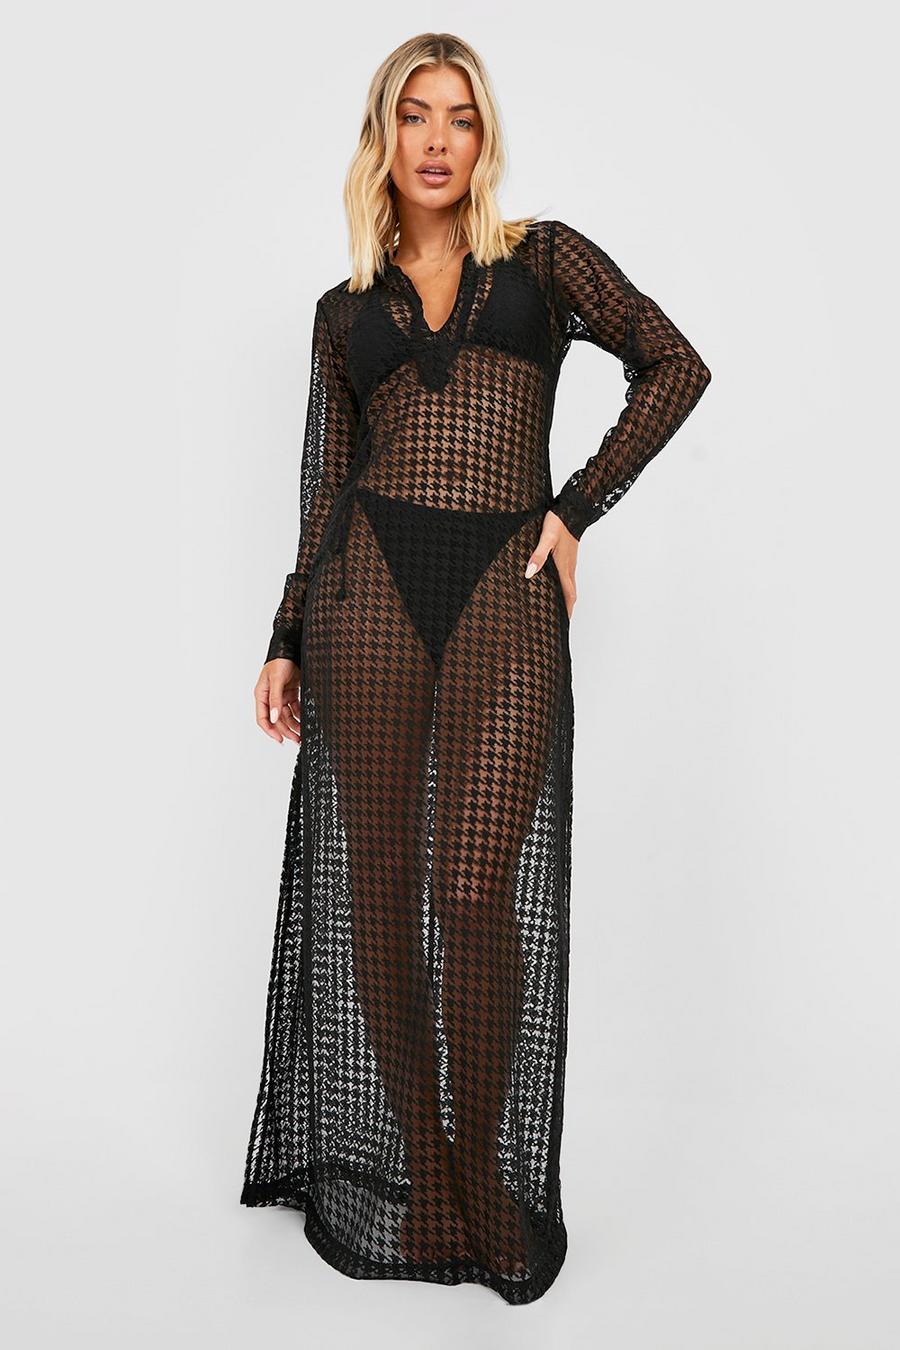 Black Dogtooth Lace Beach Cover-up Maxi Dress